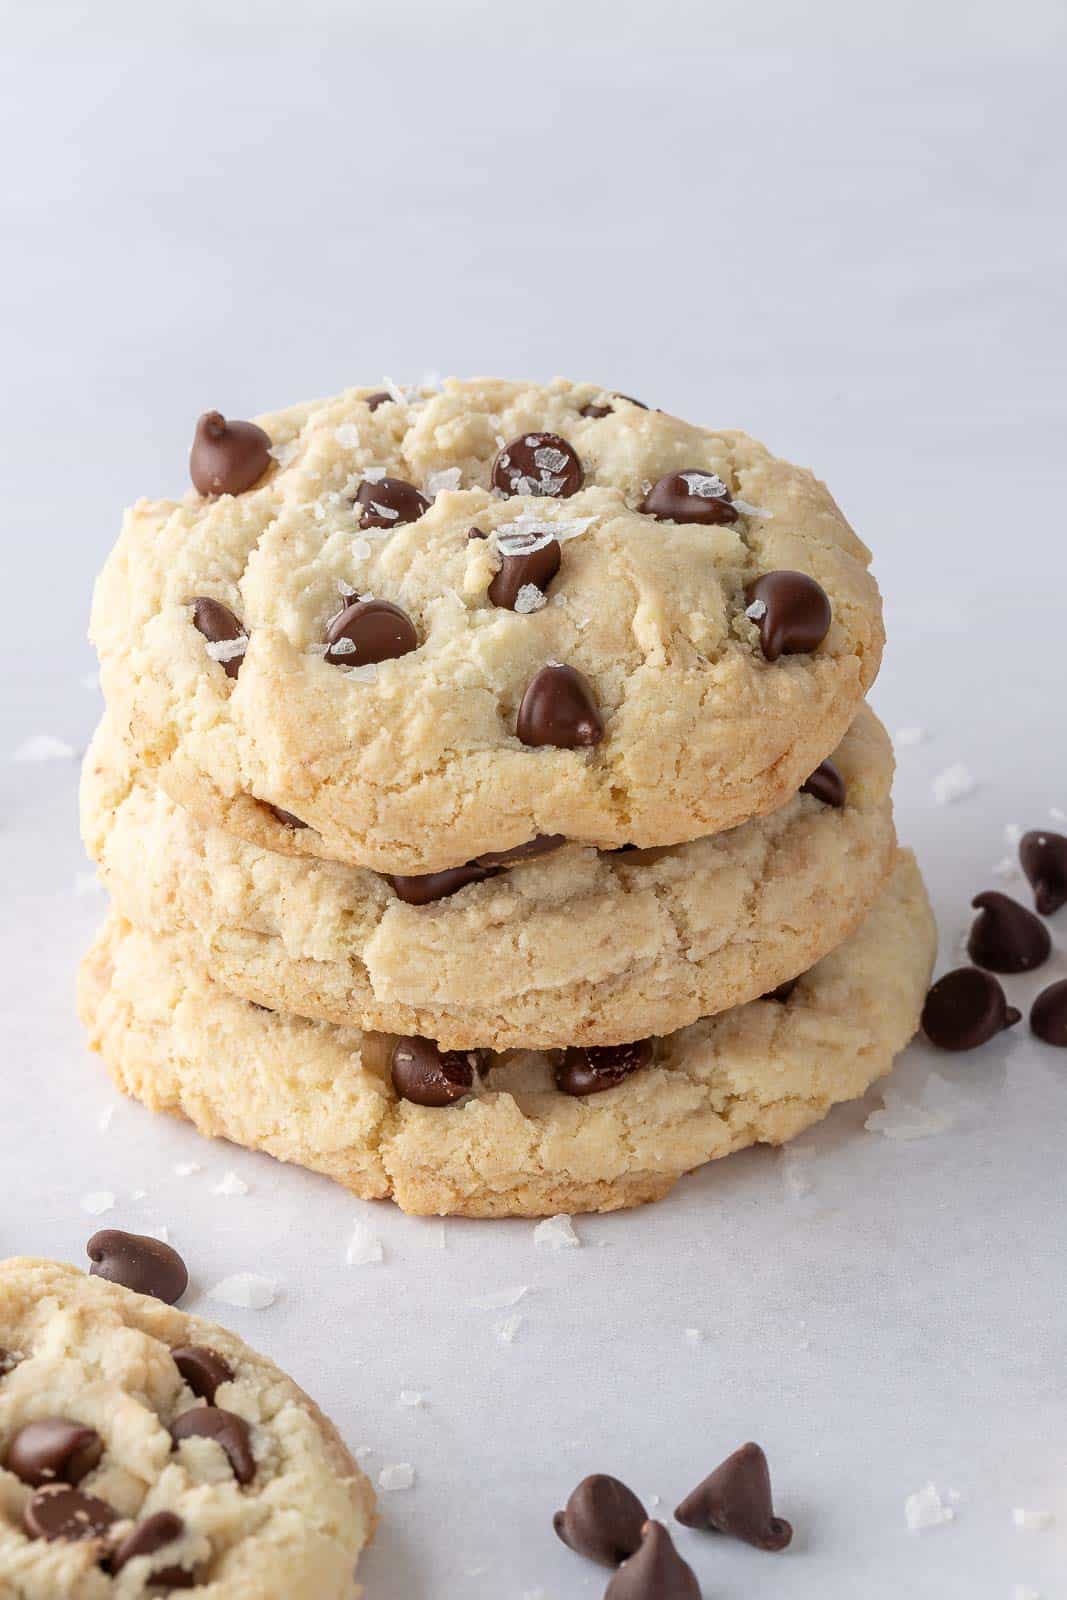 A pile of soft cookies made without eggs.